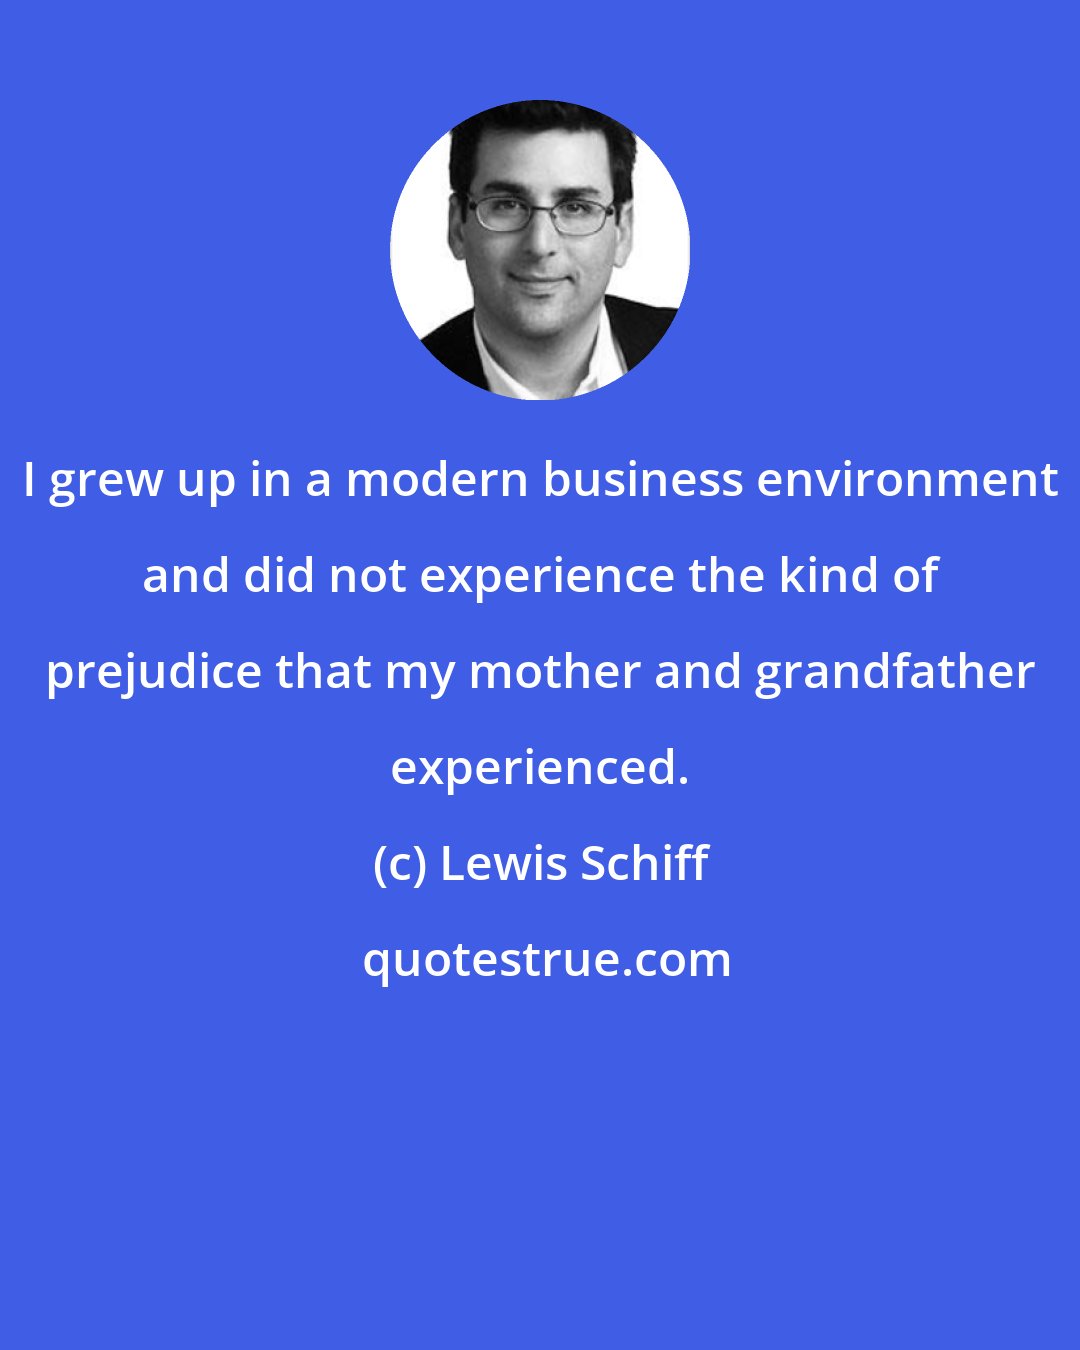 Lewis Schiff: I grew up in a modern business environment and did not experience the kind of prejudice that my mother and grandfather experienced.